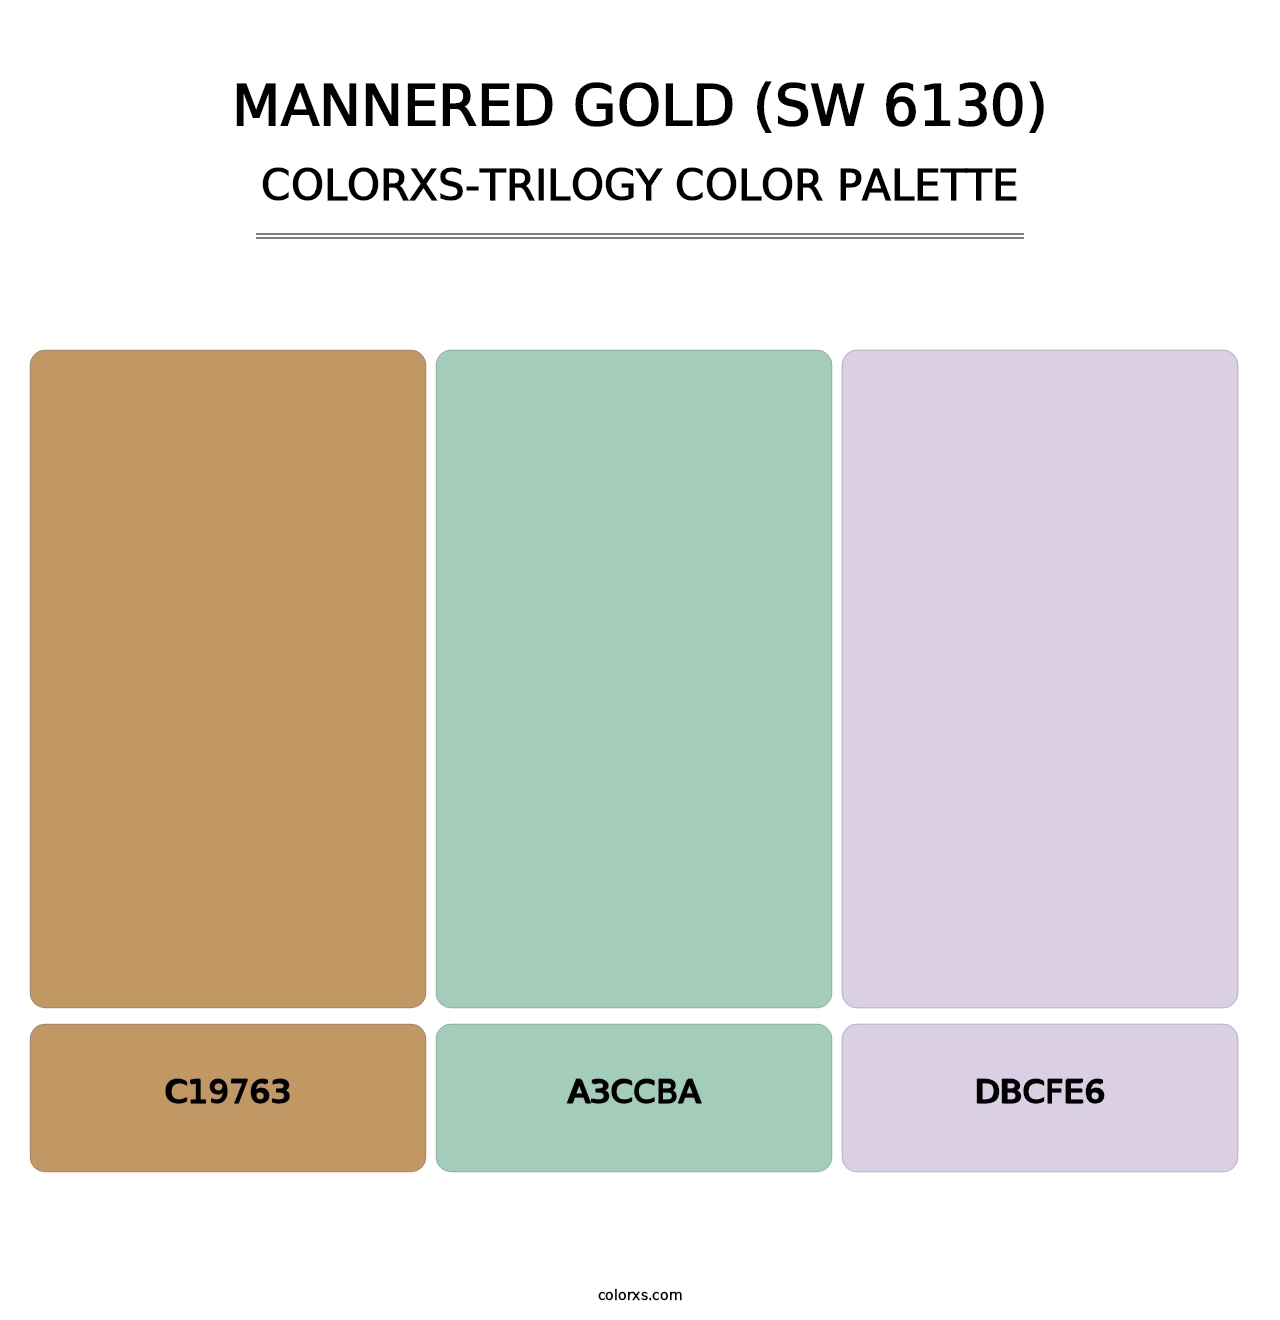 Mannered Gold (SW 6130) - Colorxs Trilogy Palette